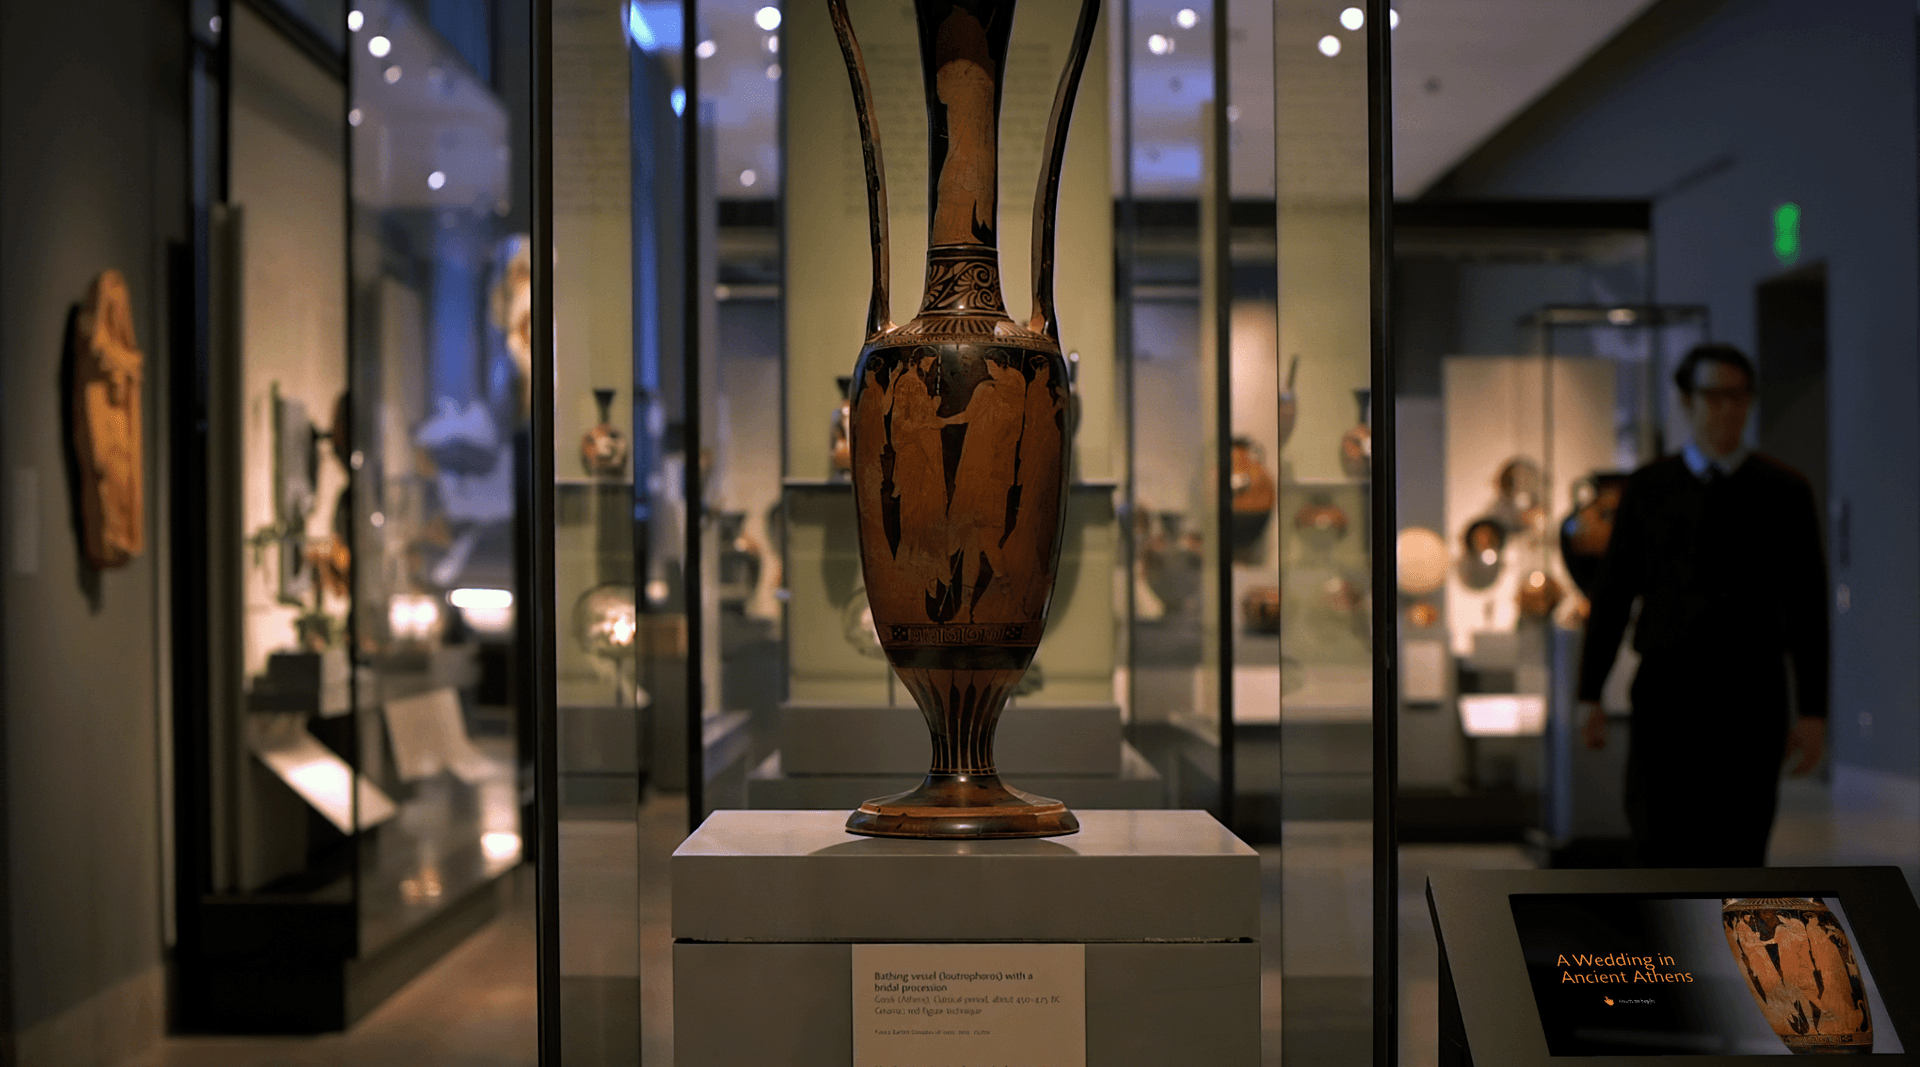 A greek bathing vessel from the classical period with red-figure depictions of a wedding procession sits in a display case at the MFA Boston. To the right a mounted iPad shows the interactive's title screen.